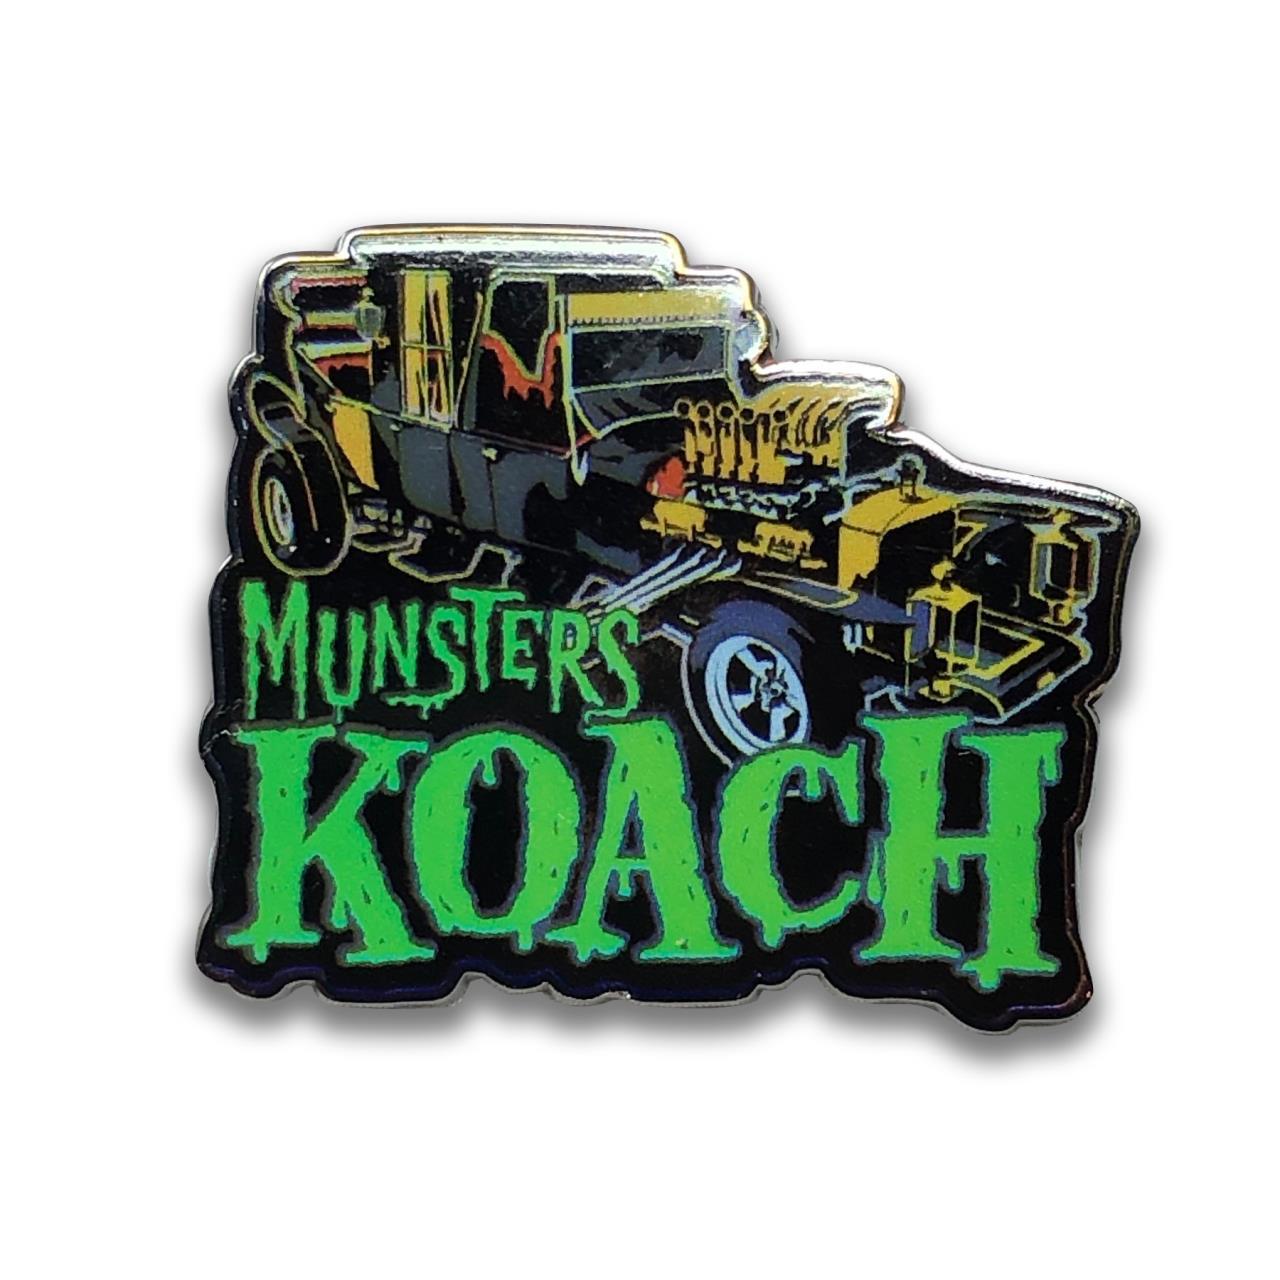 Munster's Koach Collectable Pin